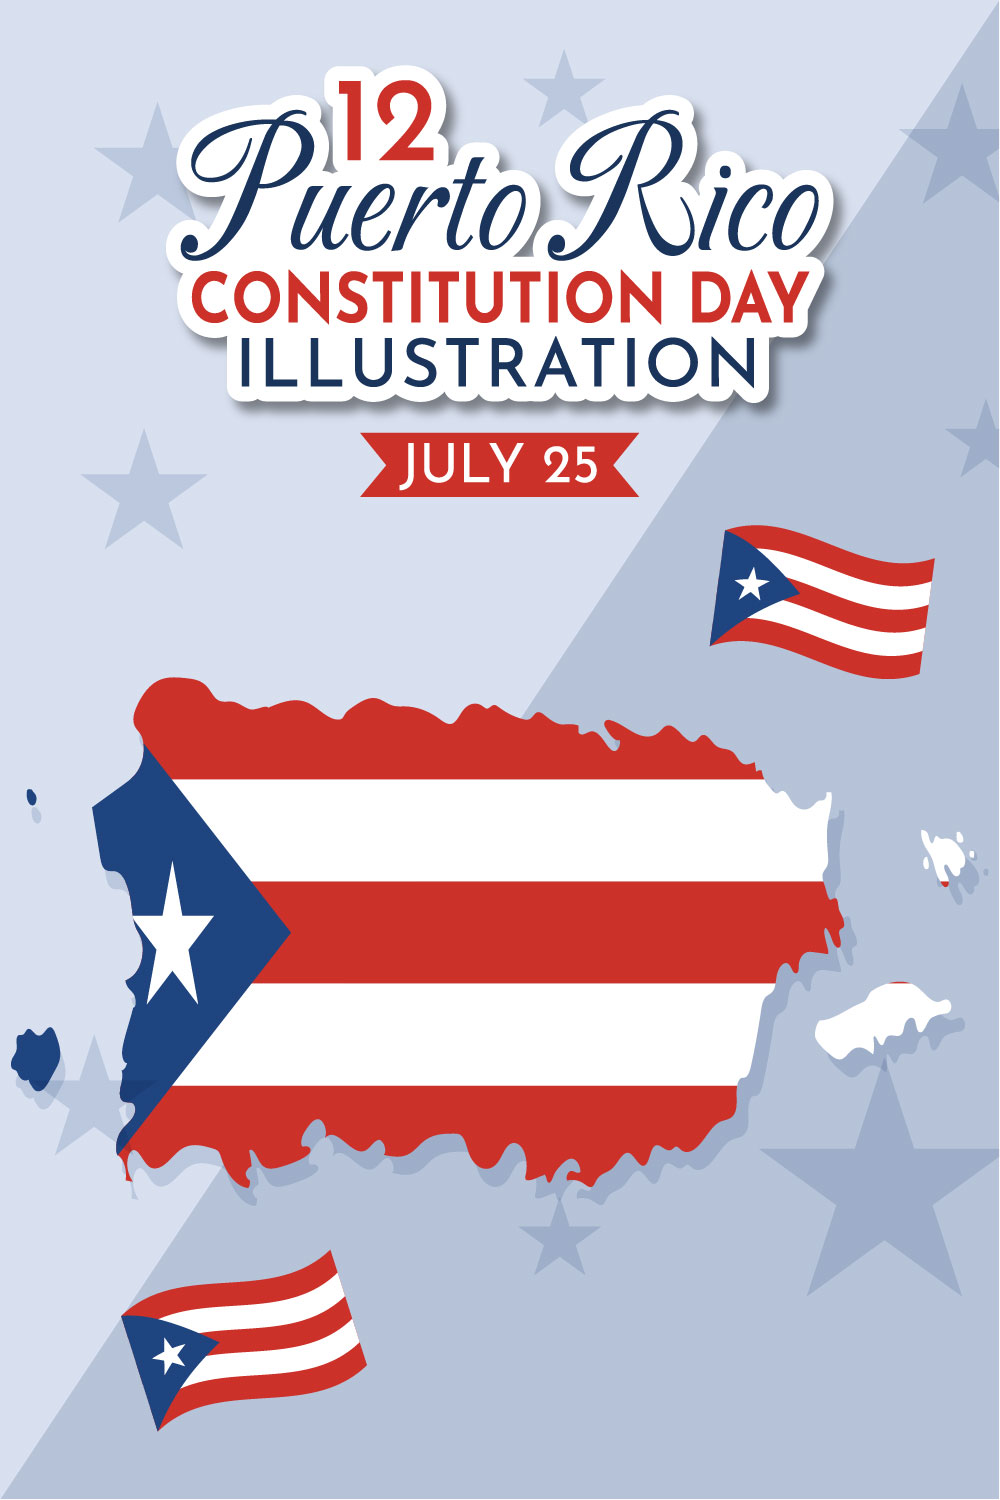 12 Happy Puerto Rico Constitution Day Illustration pinterest preview image.